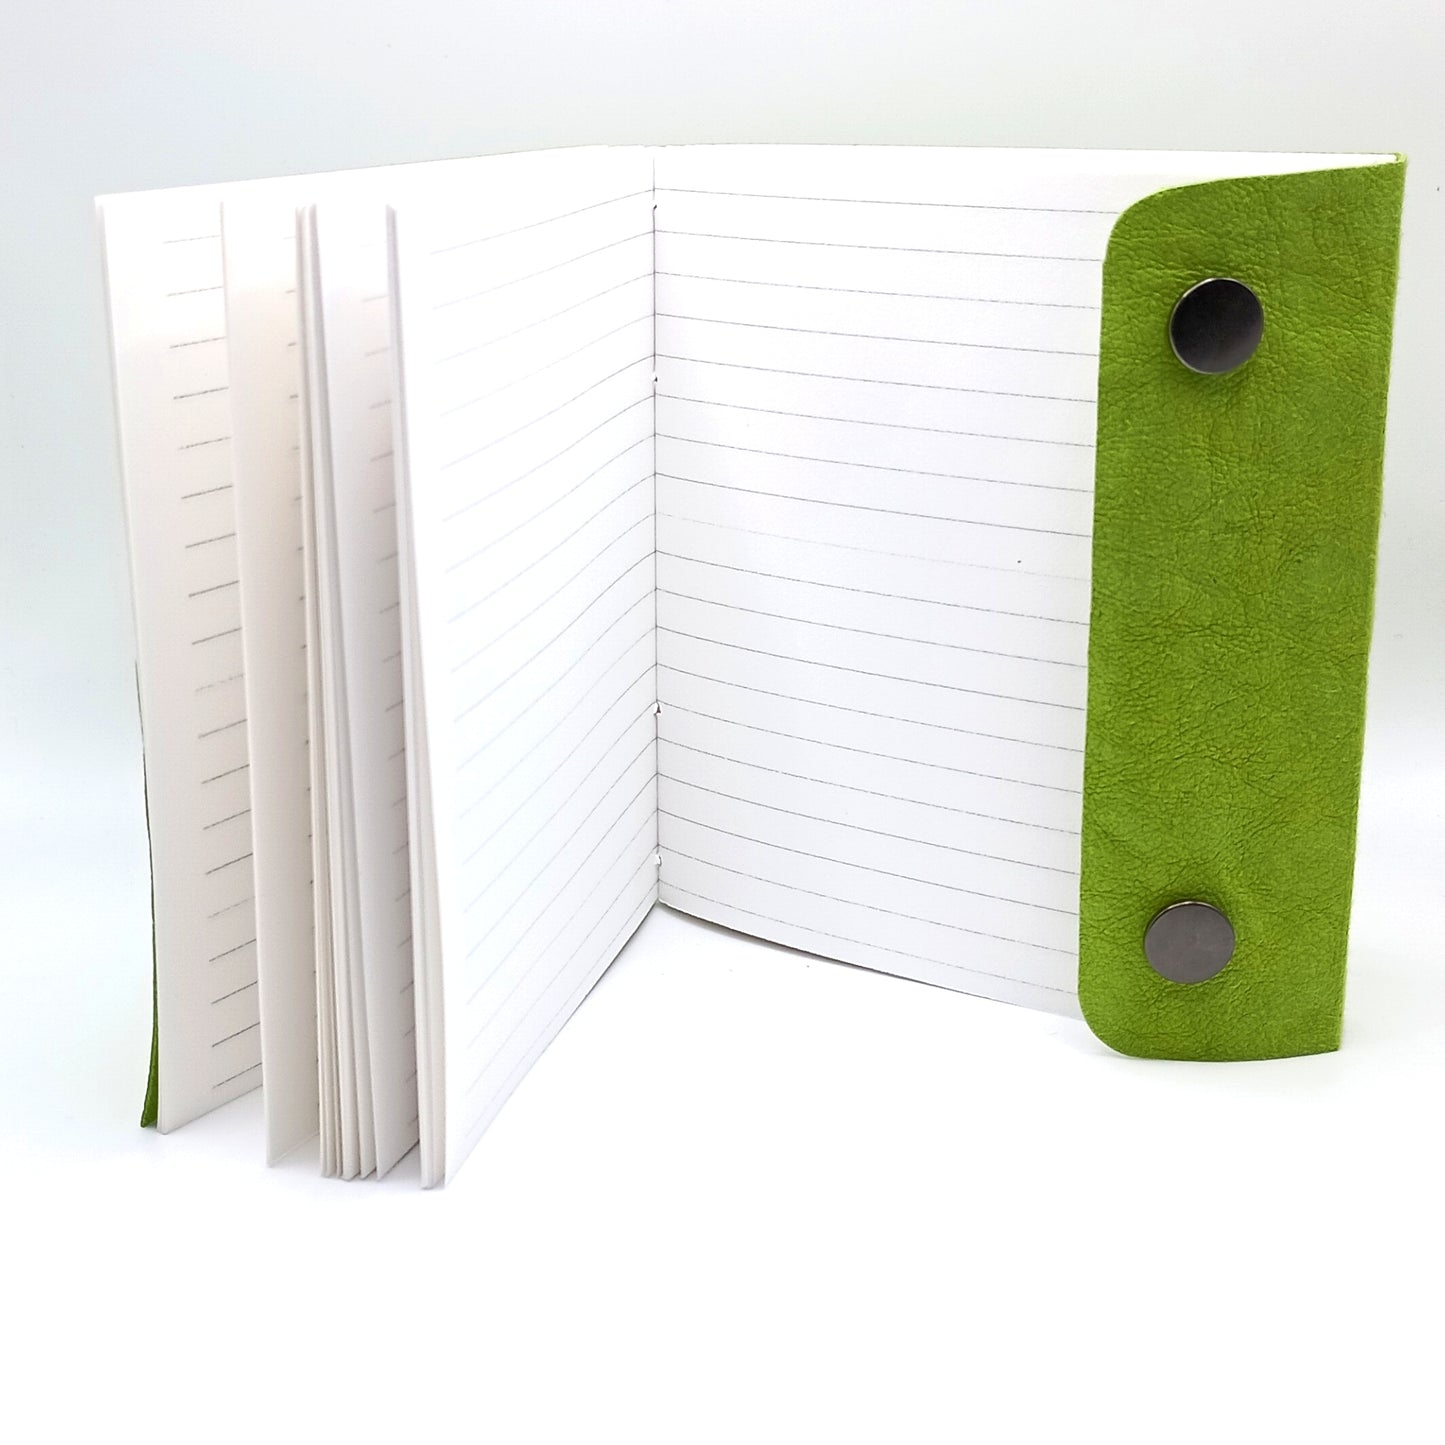 Small Spring Long stitch Journals